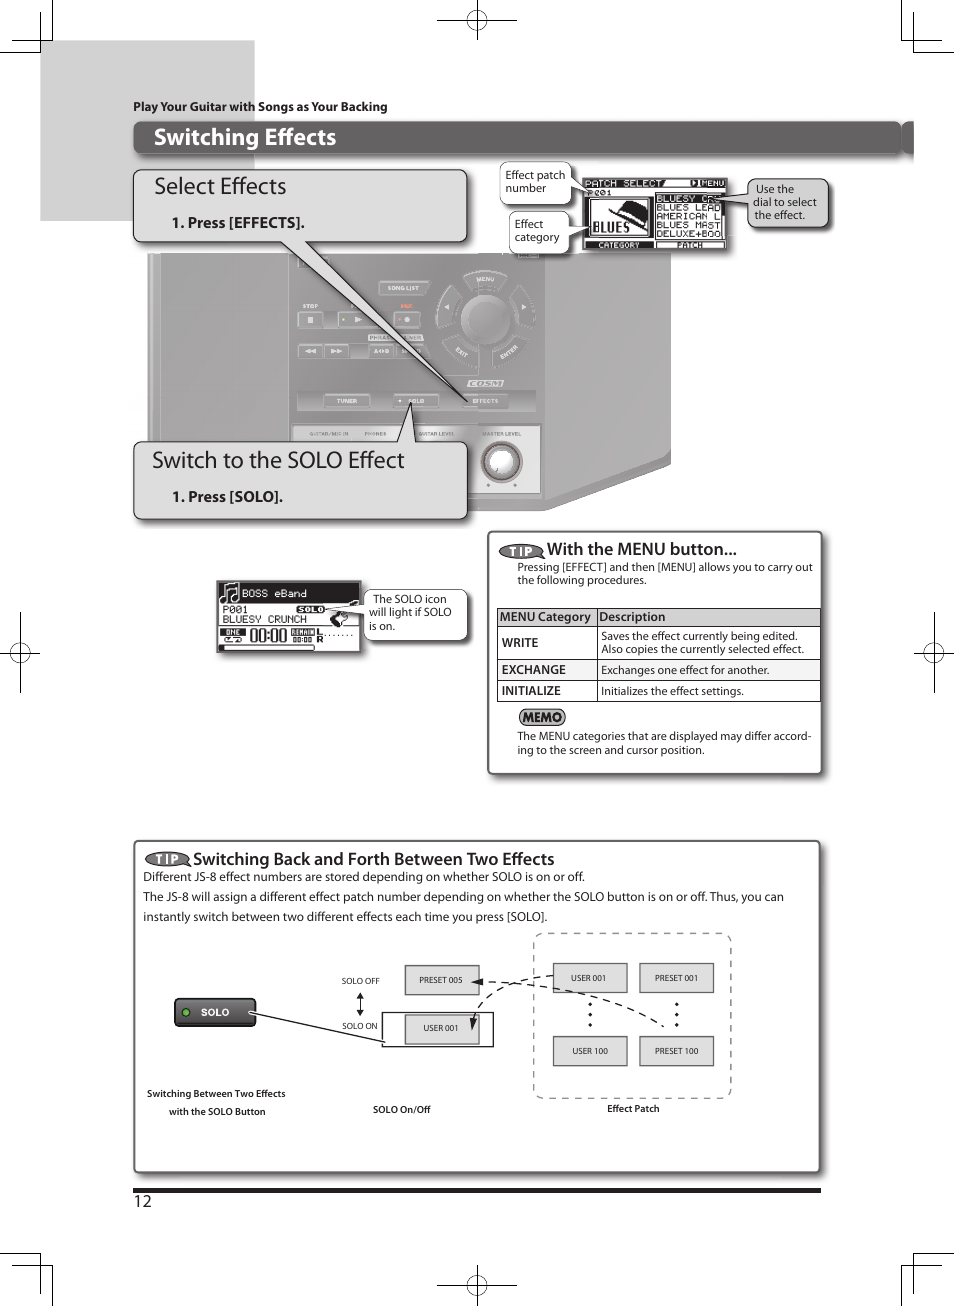 Switching eff ects, Switch to the solo eff ect, Select eff ects | Roland eBand  JS-8 User Manual | Page 14 / 47